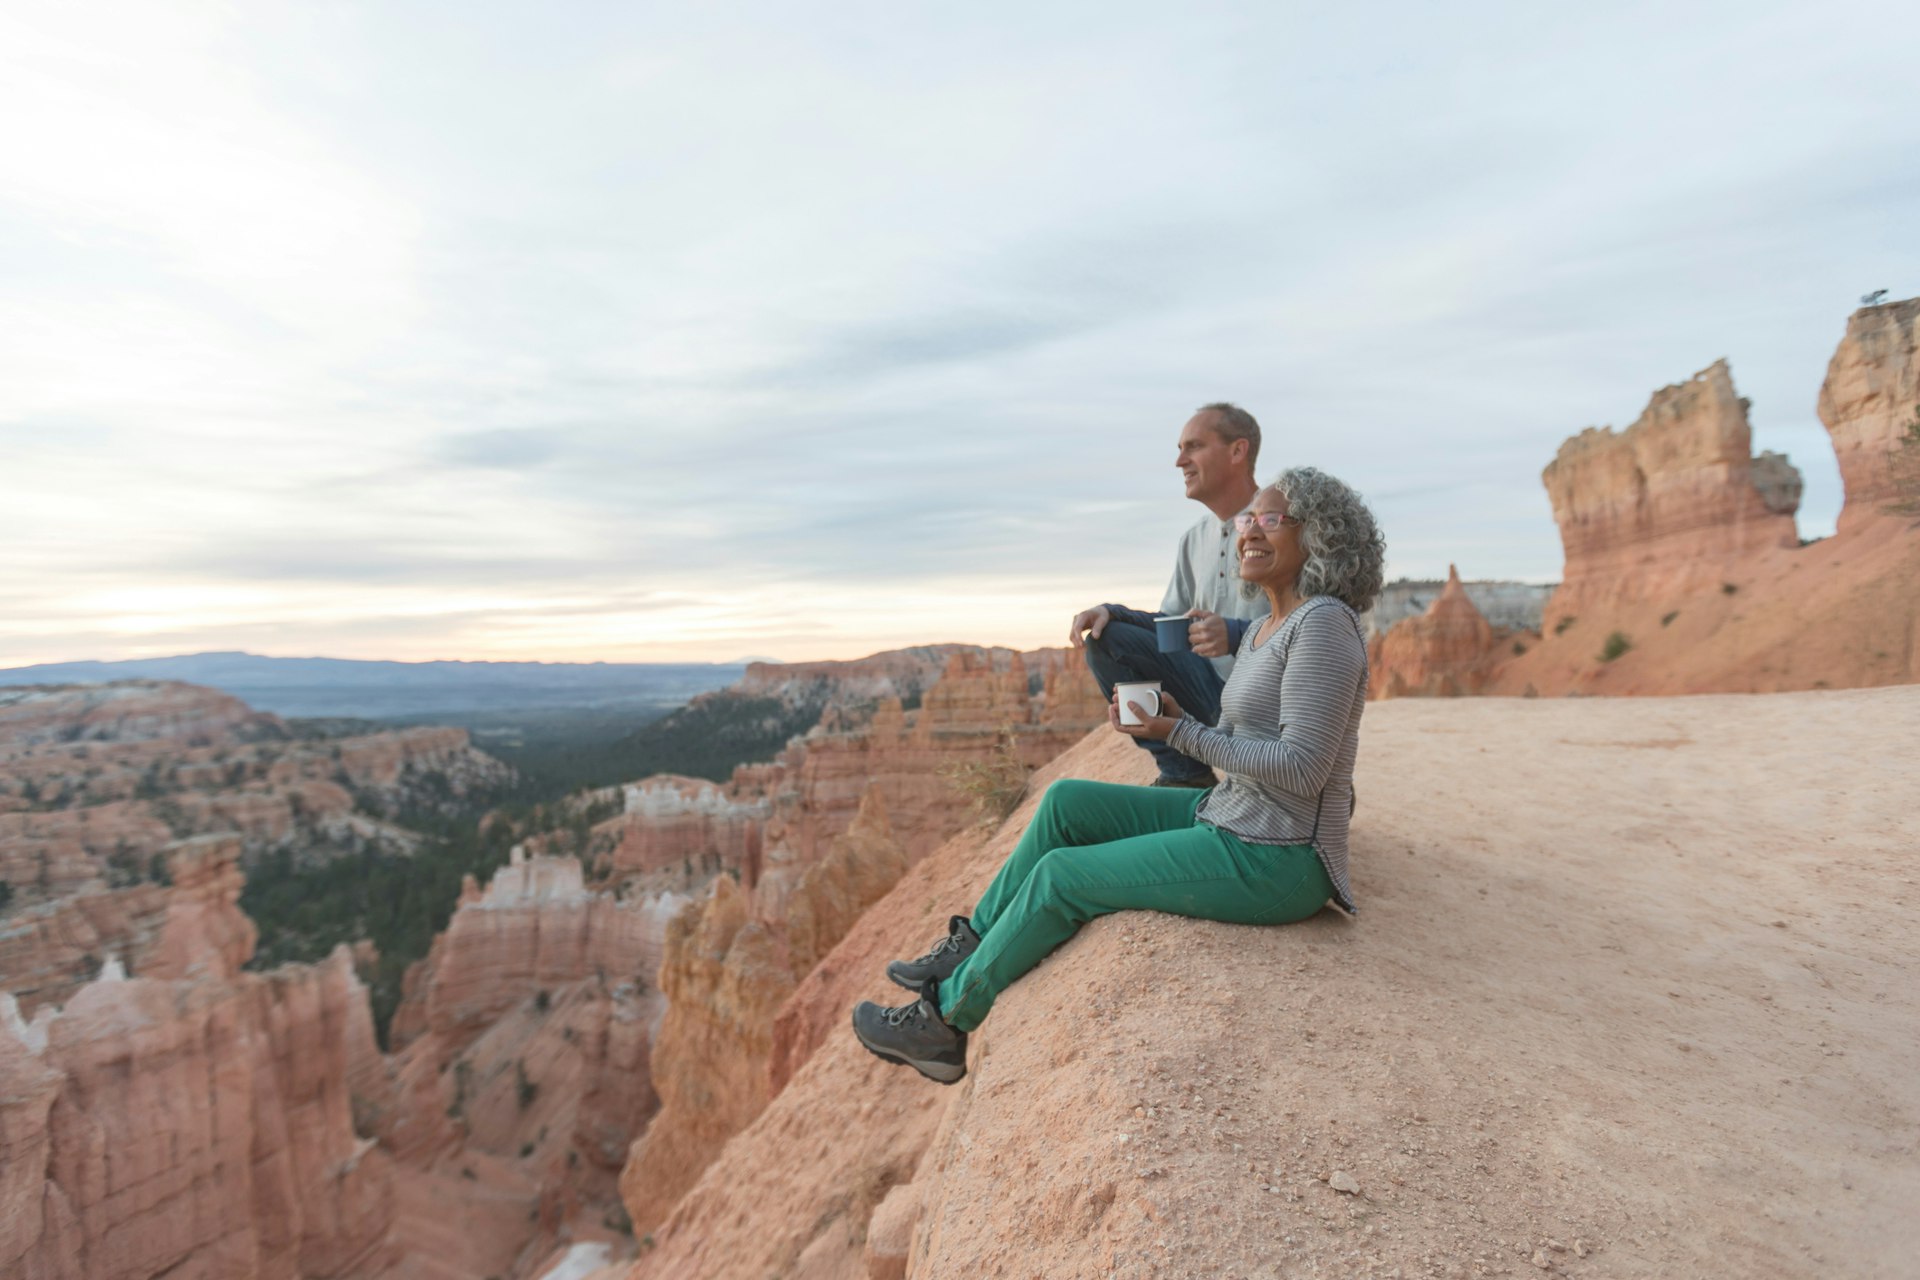 An older couple take a break from hiking to enjoy the view at Utah outlook overlooking a canyon. They are sitting on the cliff's edge and soaking in the scenery. The mountains and canyon are in front of them.